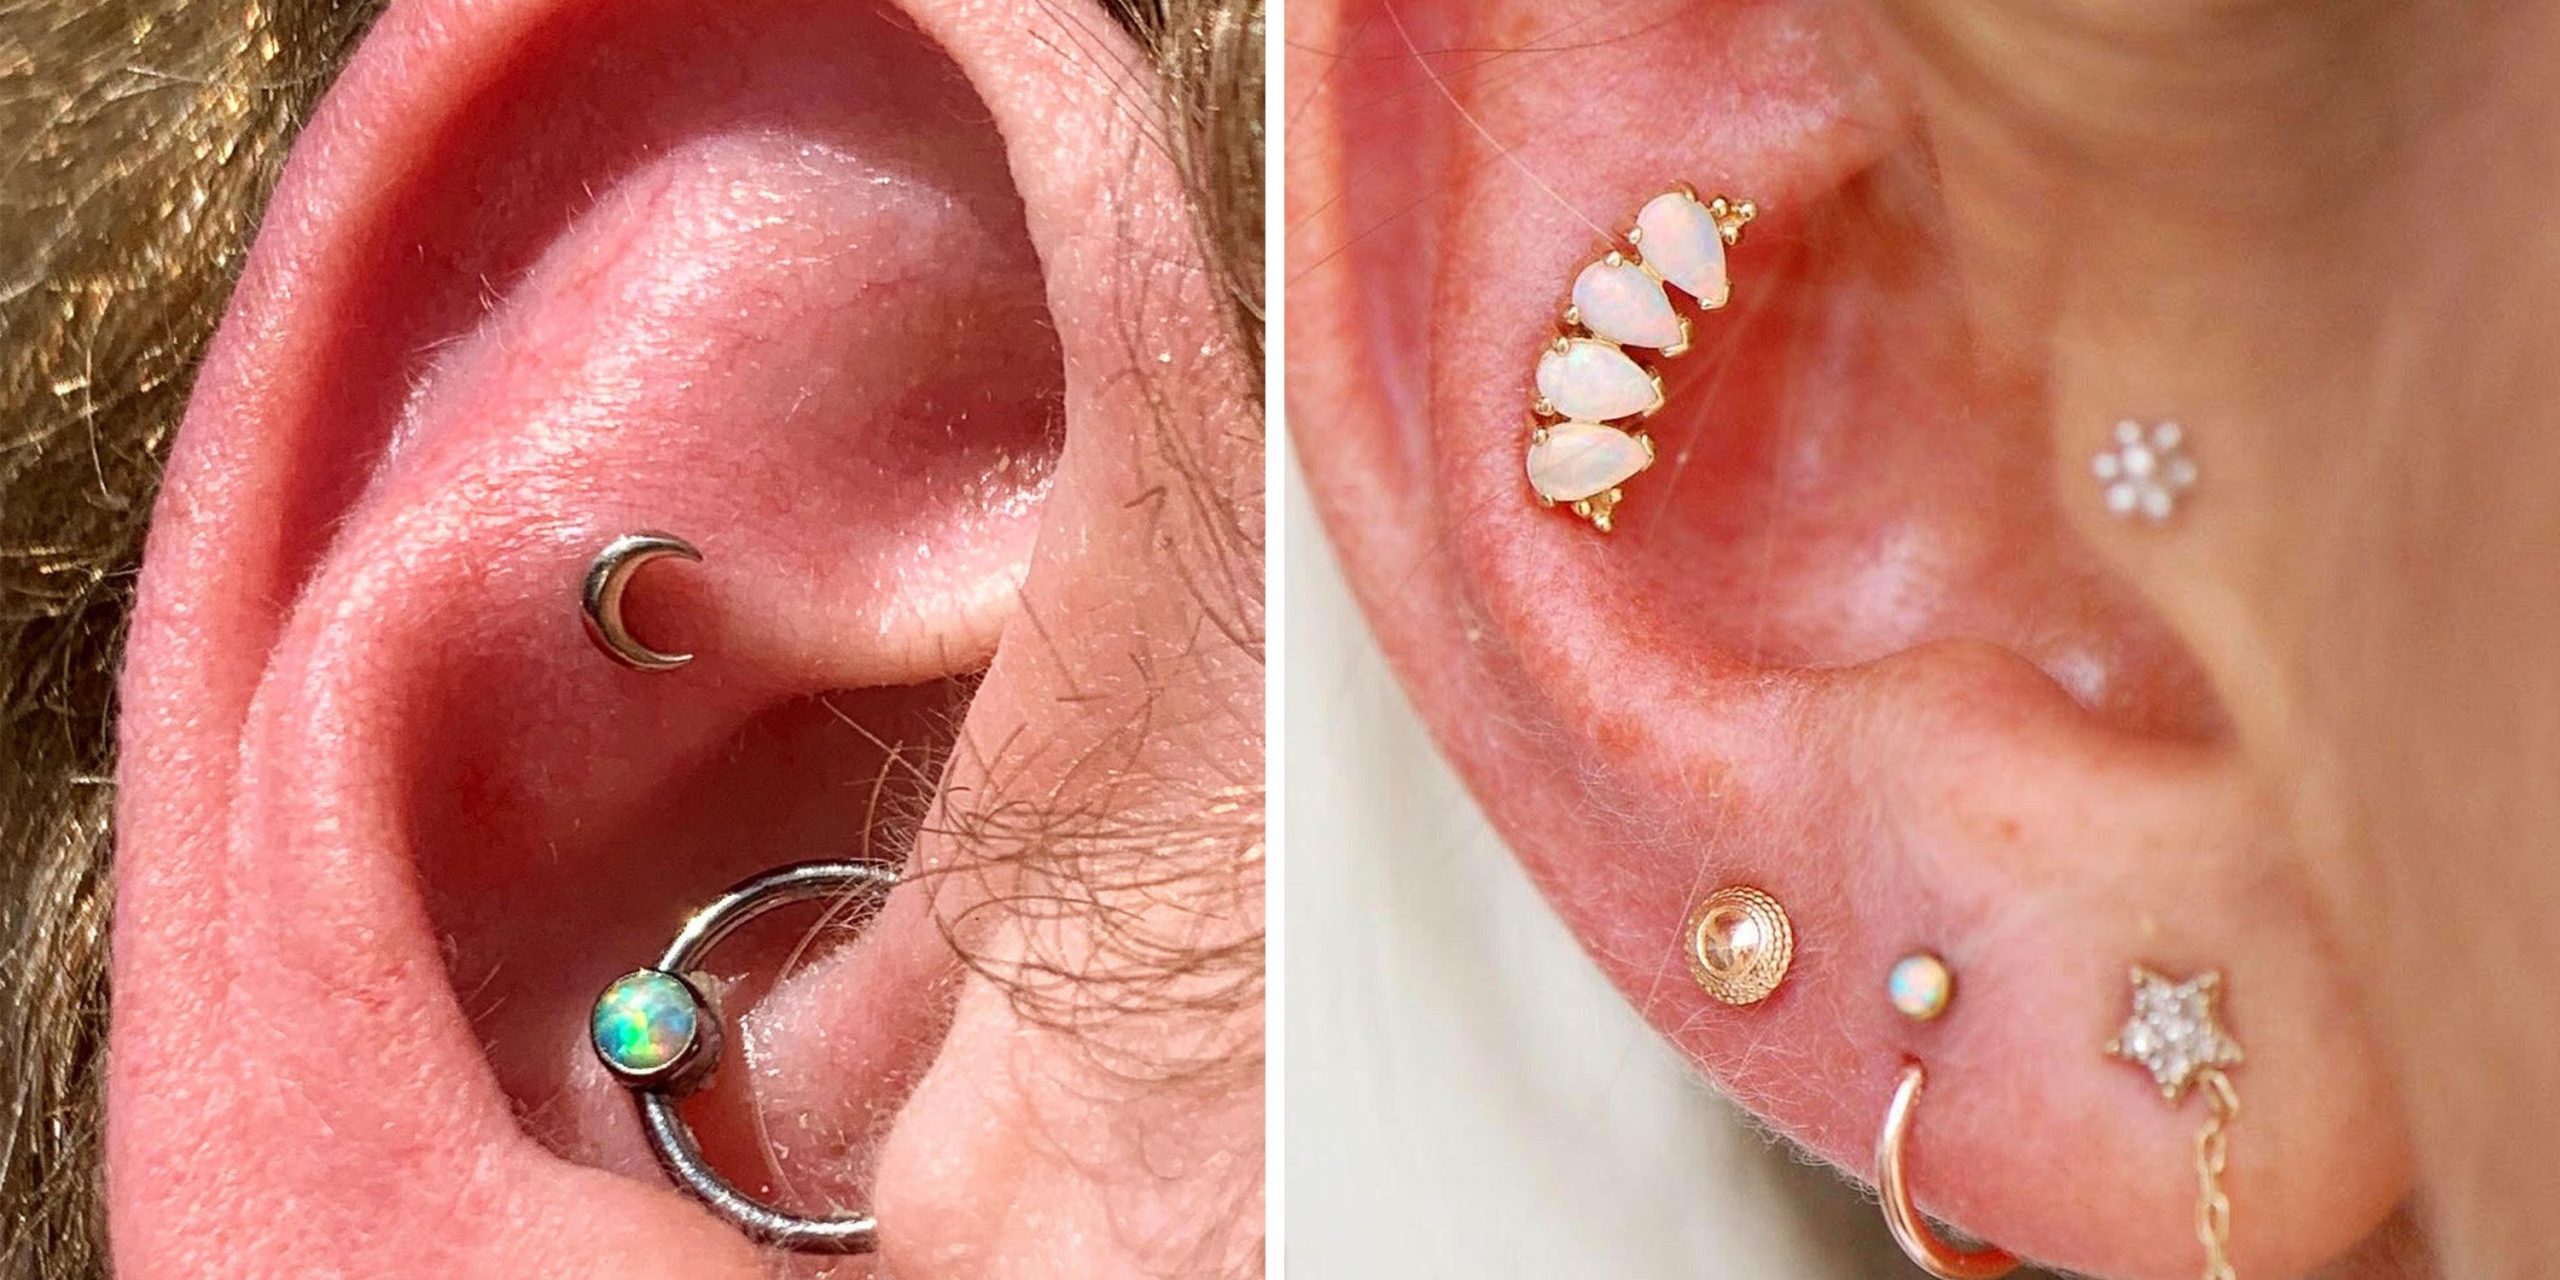 The Contraconch aka Outer Conch Piercing Is Rising in Popularity